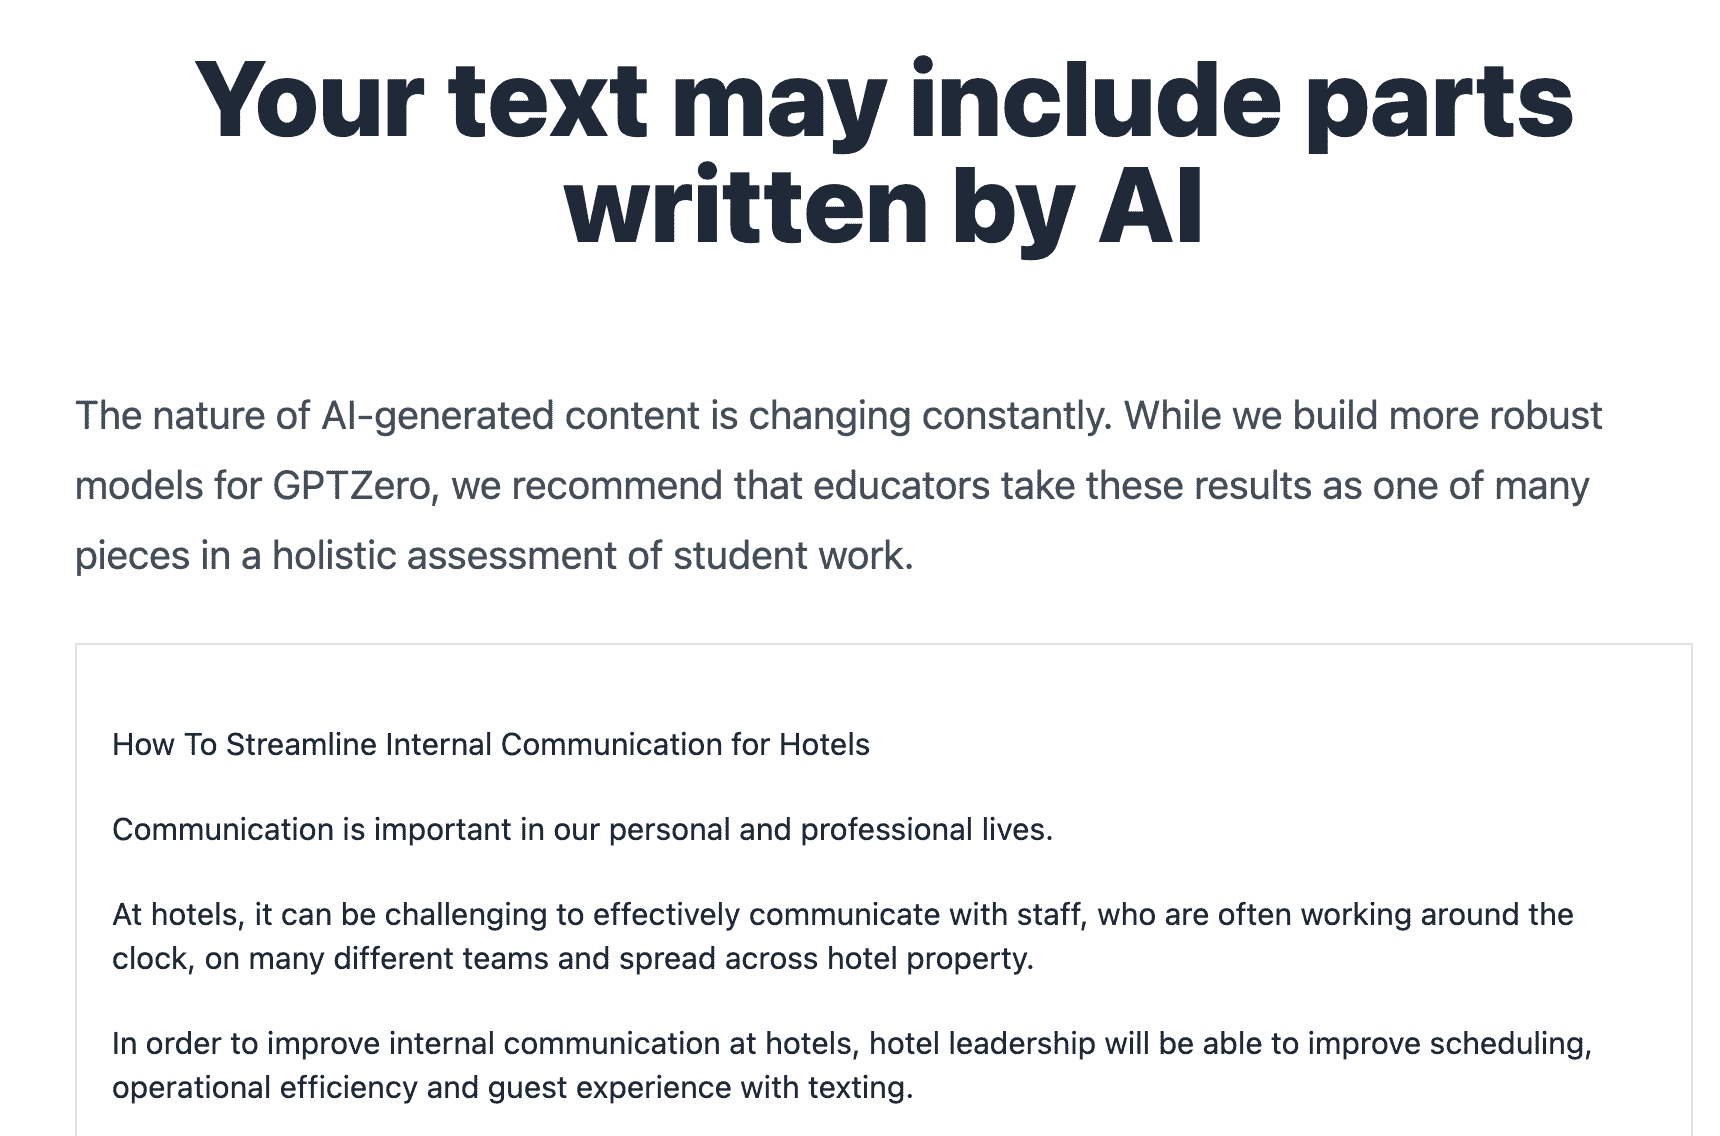 Text may include parts written with AI from GPTZero